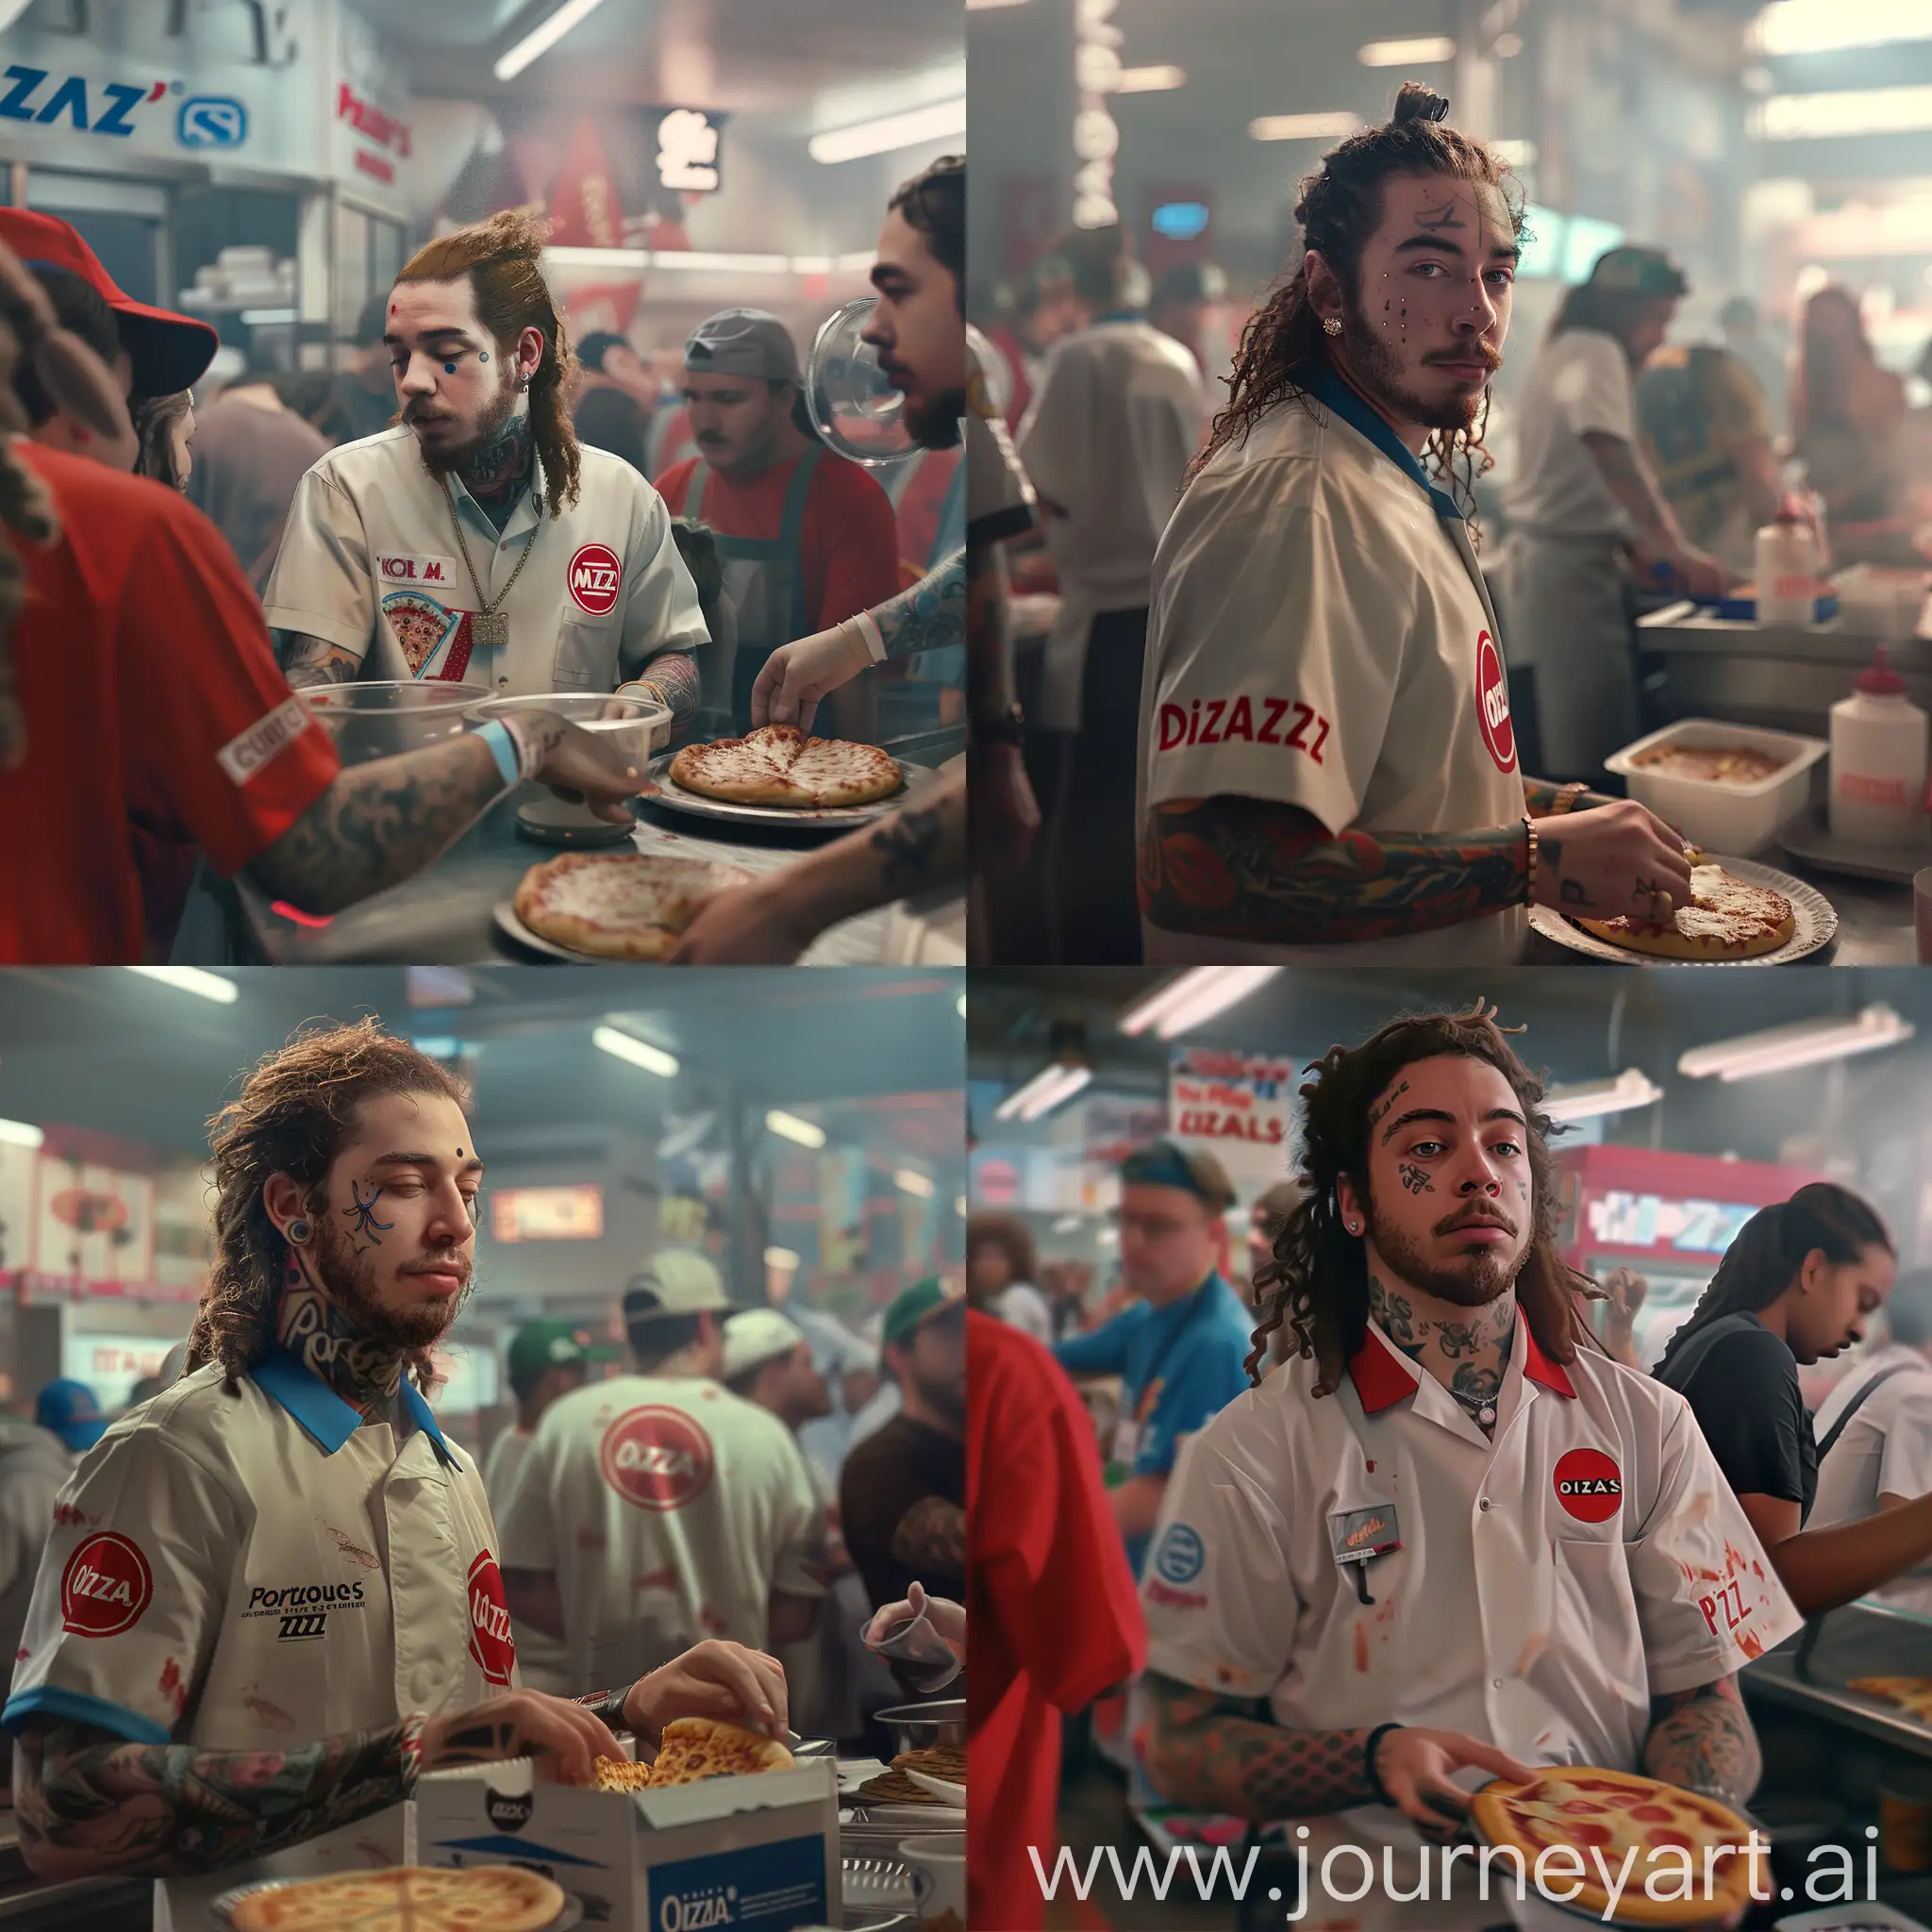 "Immerse yourself in the hustle and bustle of a busy fast food joint with The Post Malone as your guide. This incredible AI-generated image will transport you to the heart of the action, where you can witness the rapper in his Domino's Pizza uniform, dishing out delicious slices to eager customers."